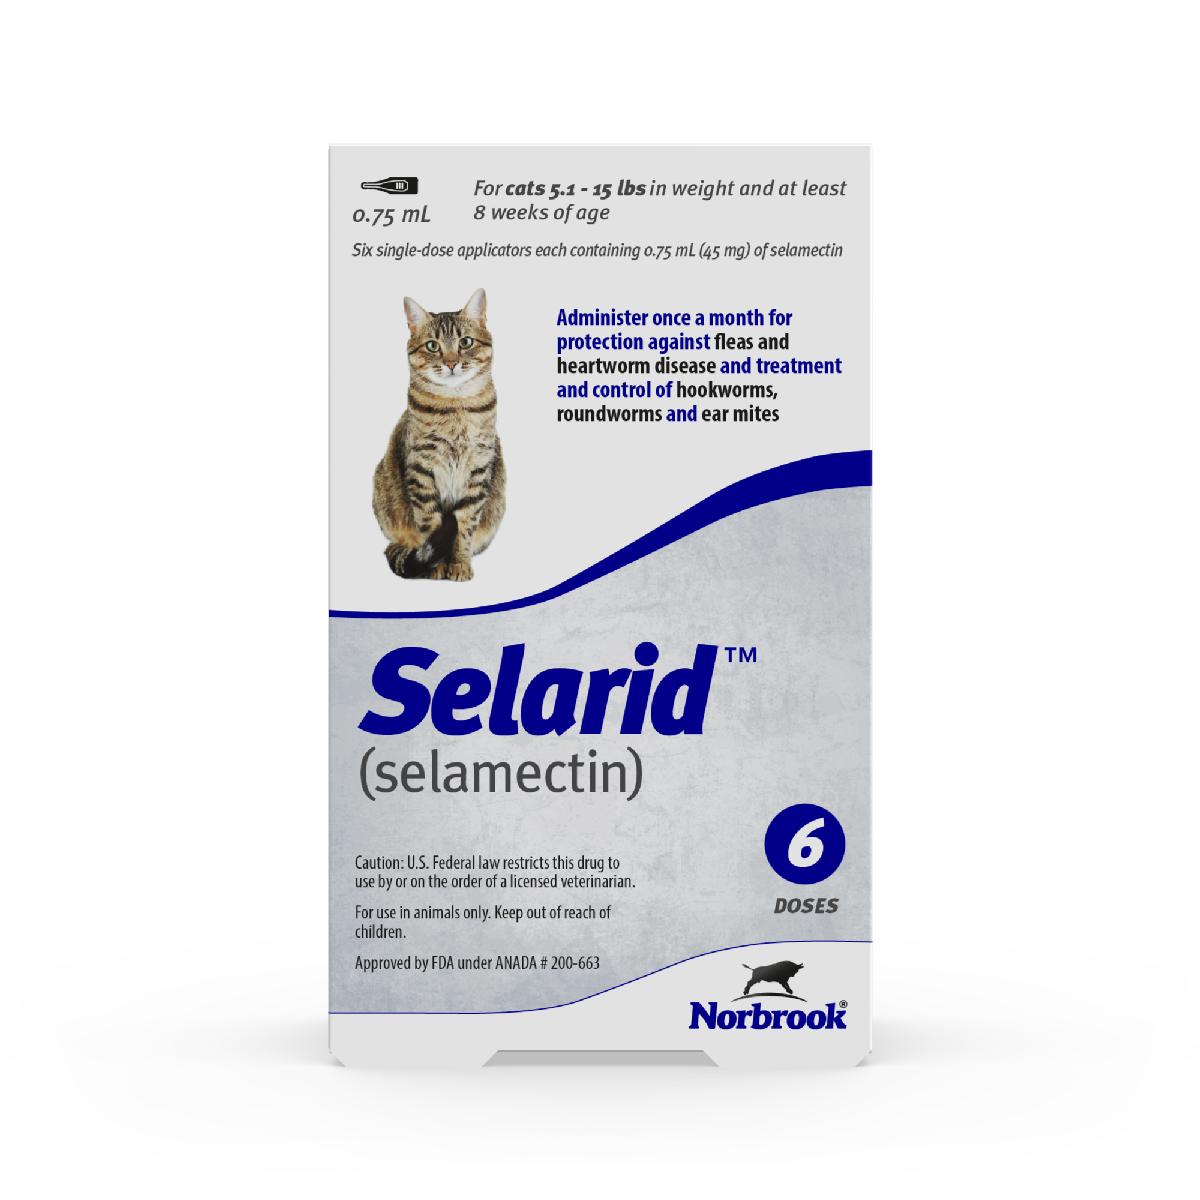 Selarid (selamectin) Topical Parasiticide for Cats 5.115 lbs, 6 count